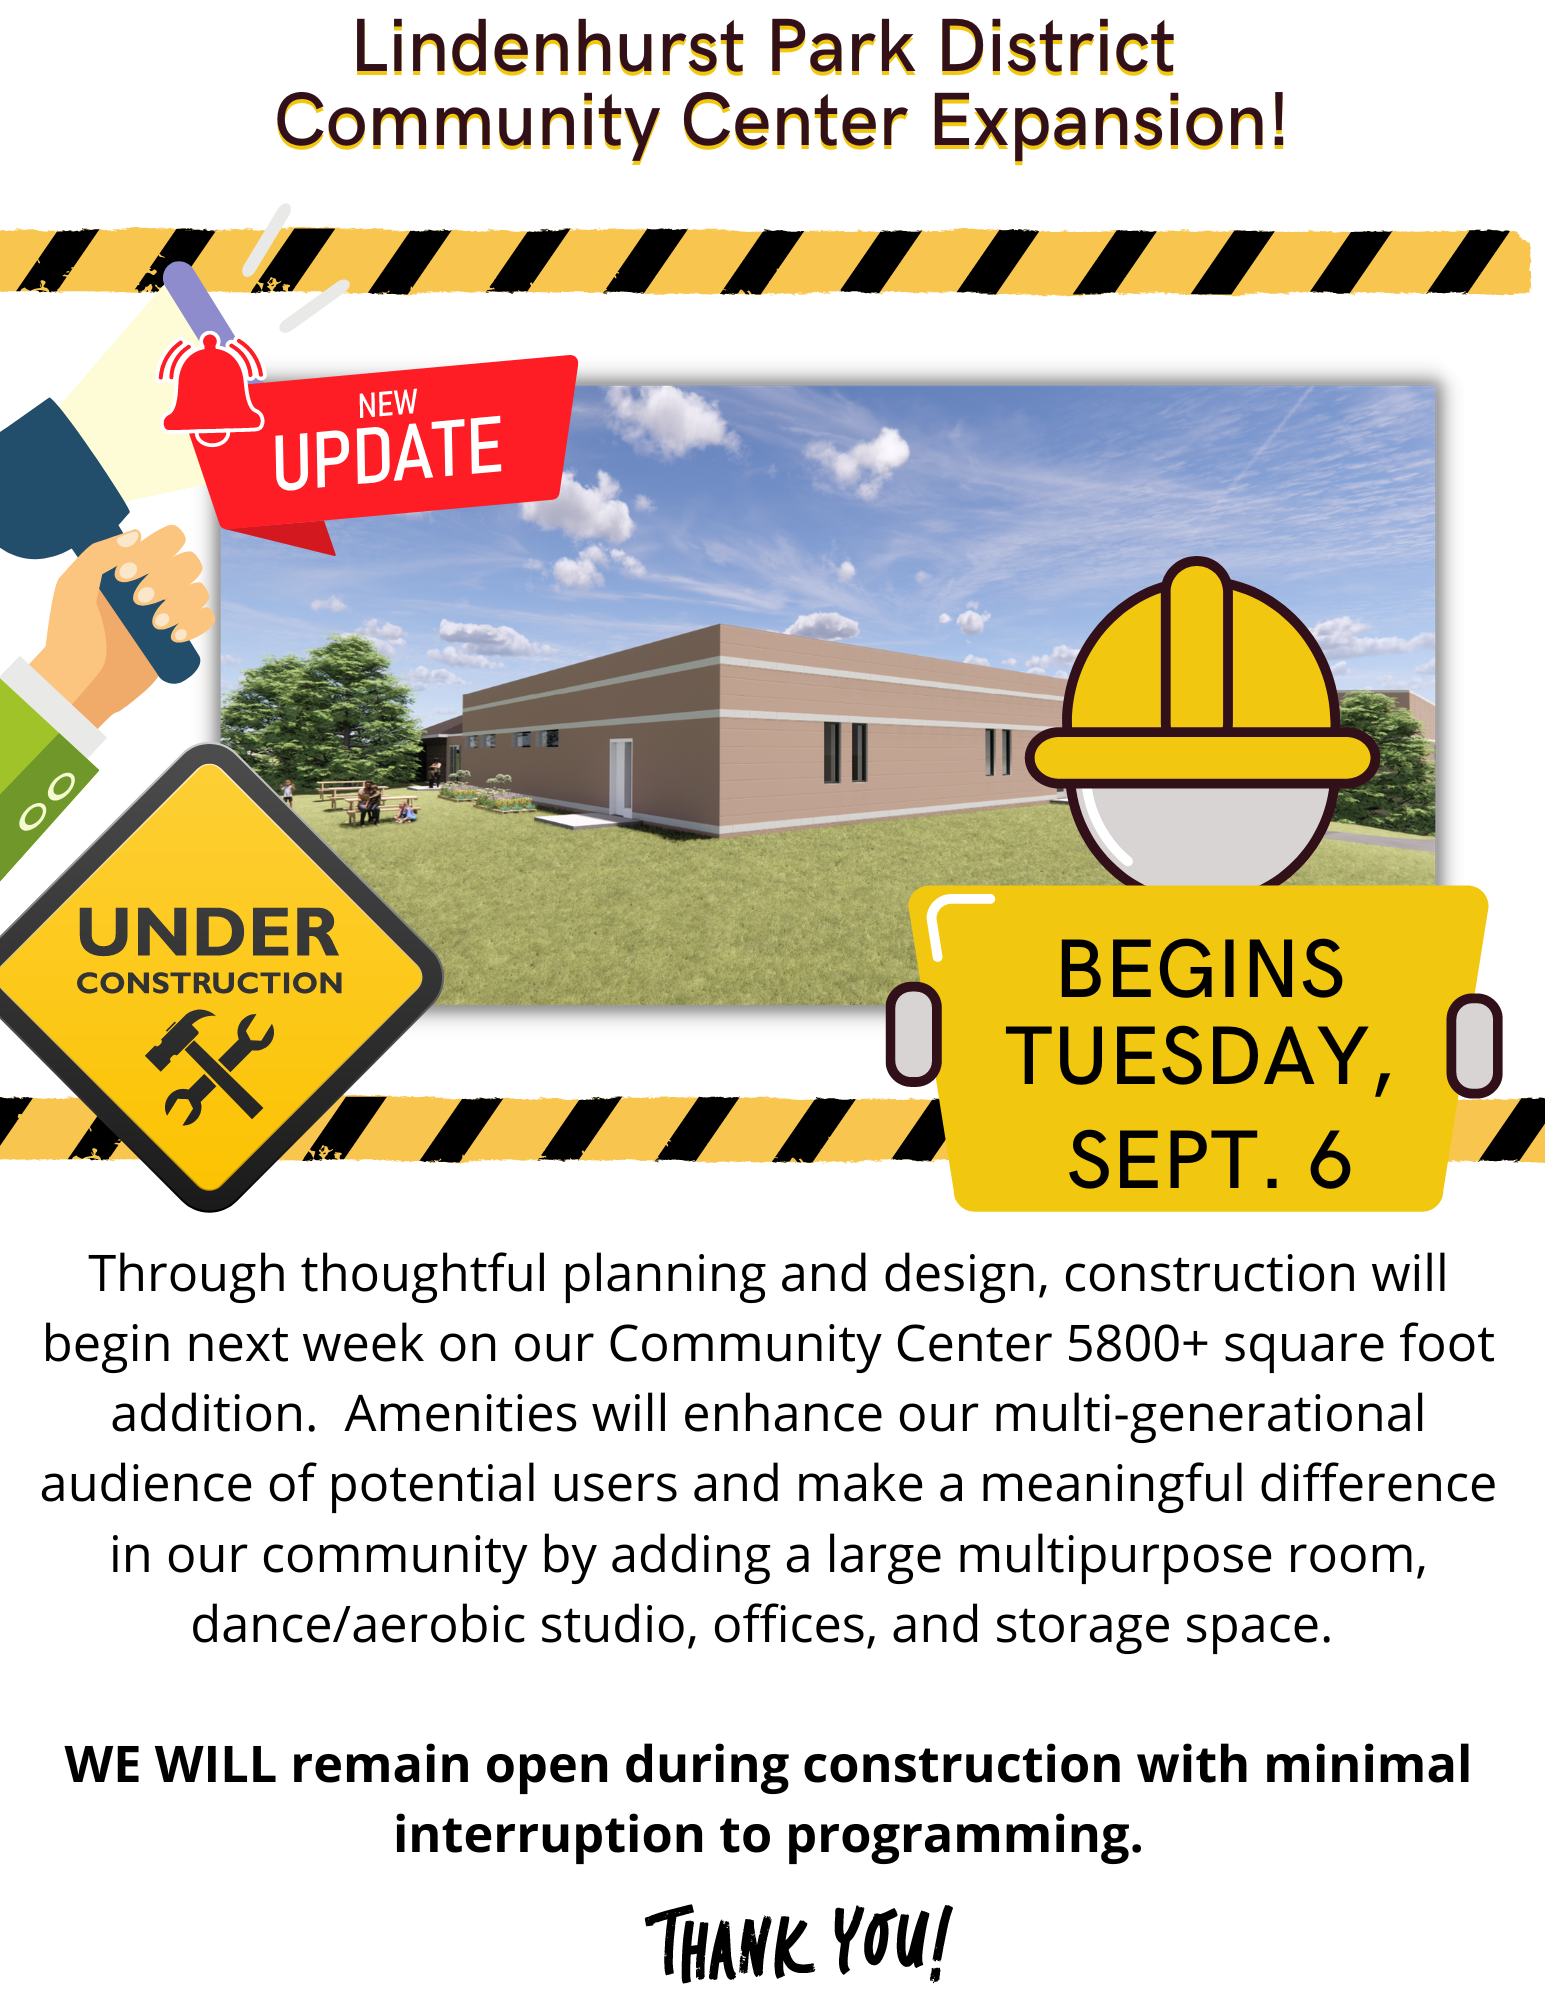 A flyer announcing the expansion of the Lindenhurst Park District Community Center. It features construction-themed graphics, indicating the project starts on Tuesday, September 6. The expansion includes a 5800+ square foot addition for a multipurpose room, dance/aerobic studio, offices, and storage. The flyer assures that the center will remain open during construction with minimal disruption to programs, expressing gratitude with a "Thank You!" note at the bottom.